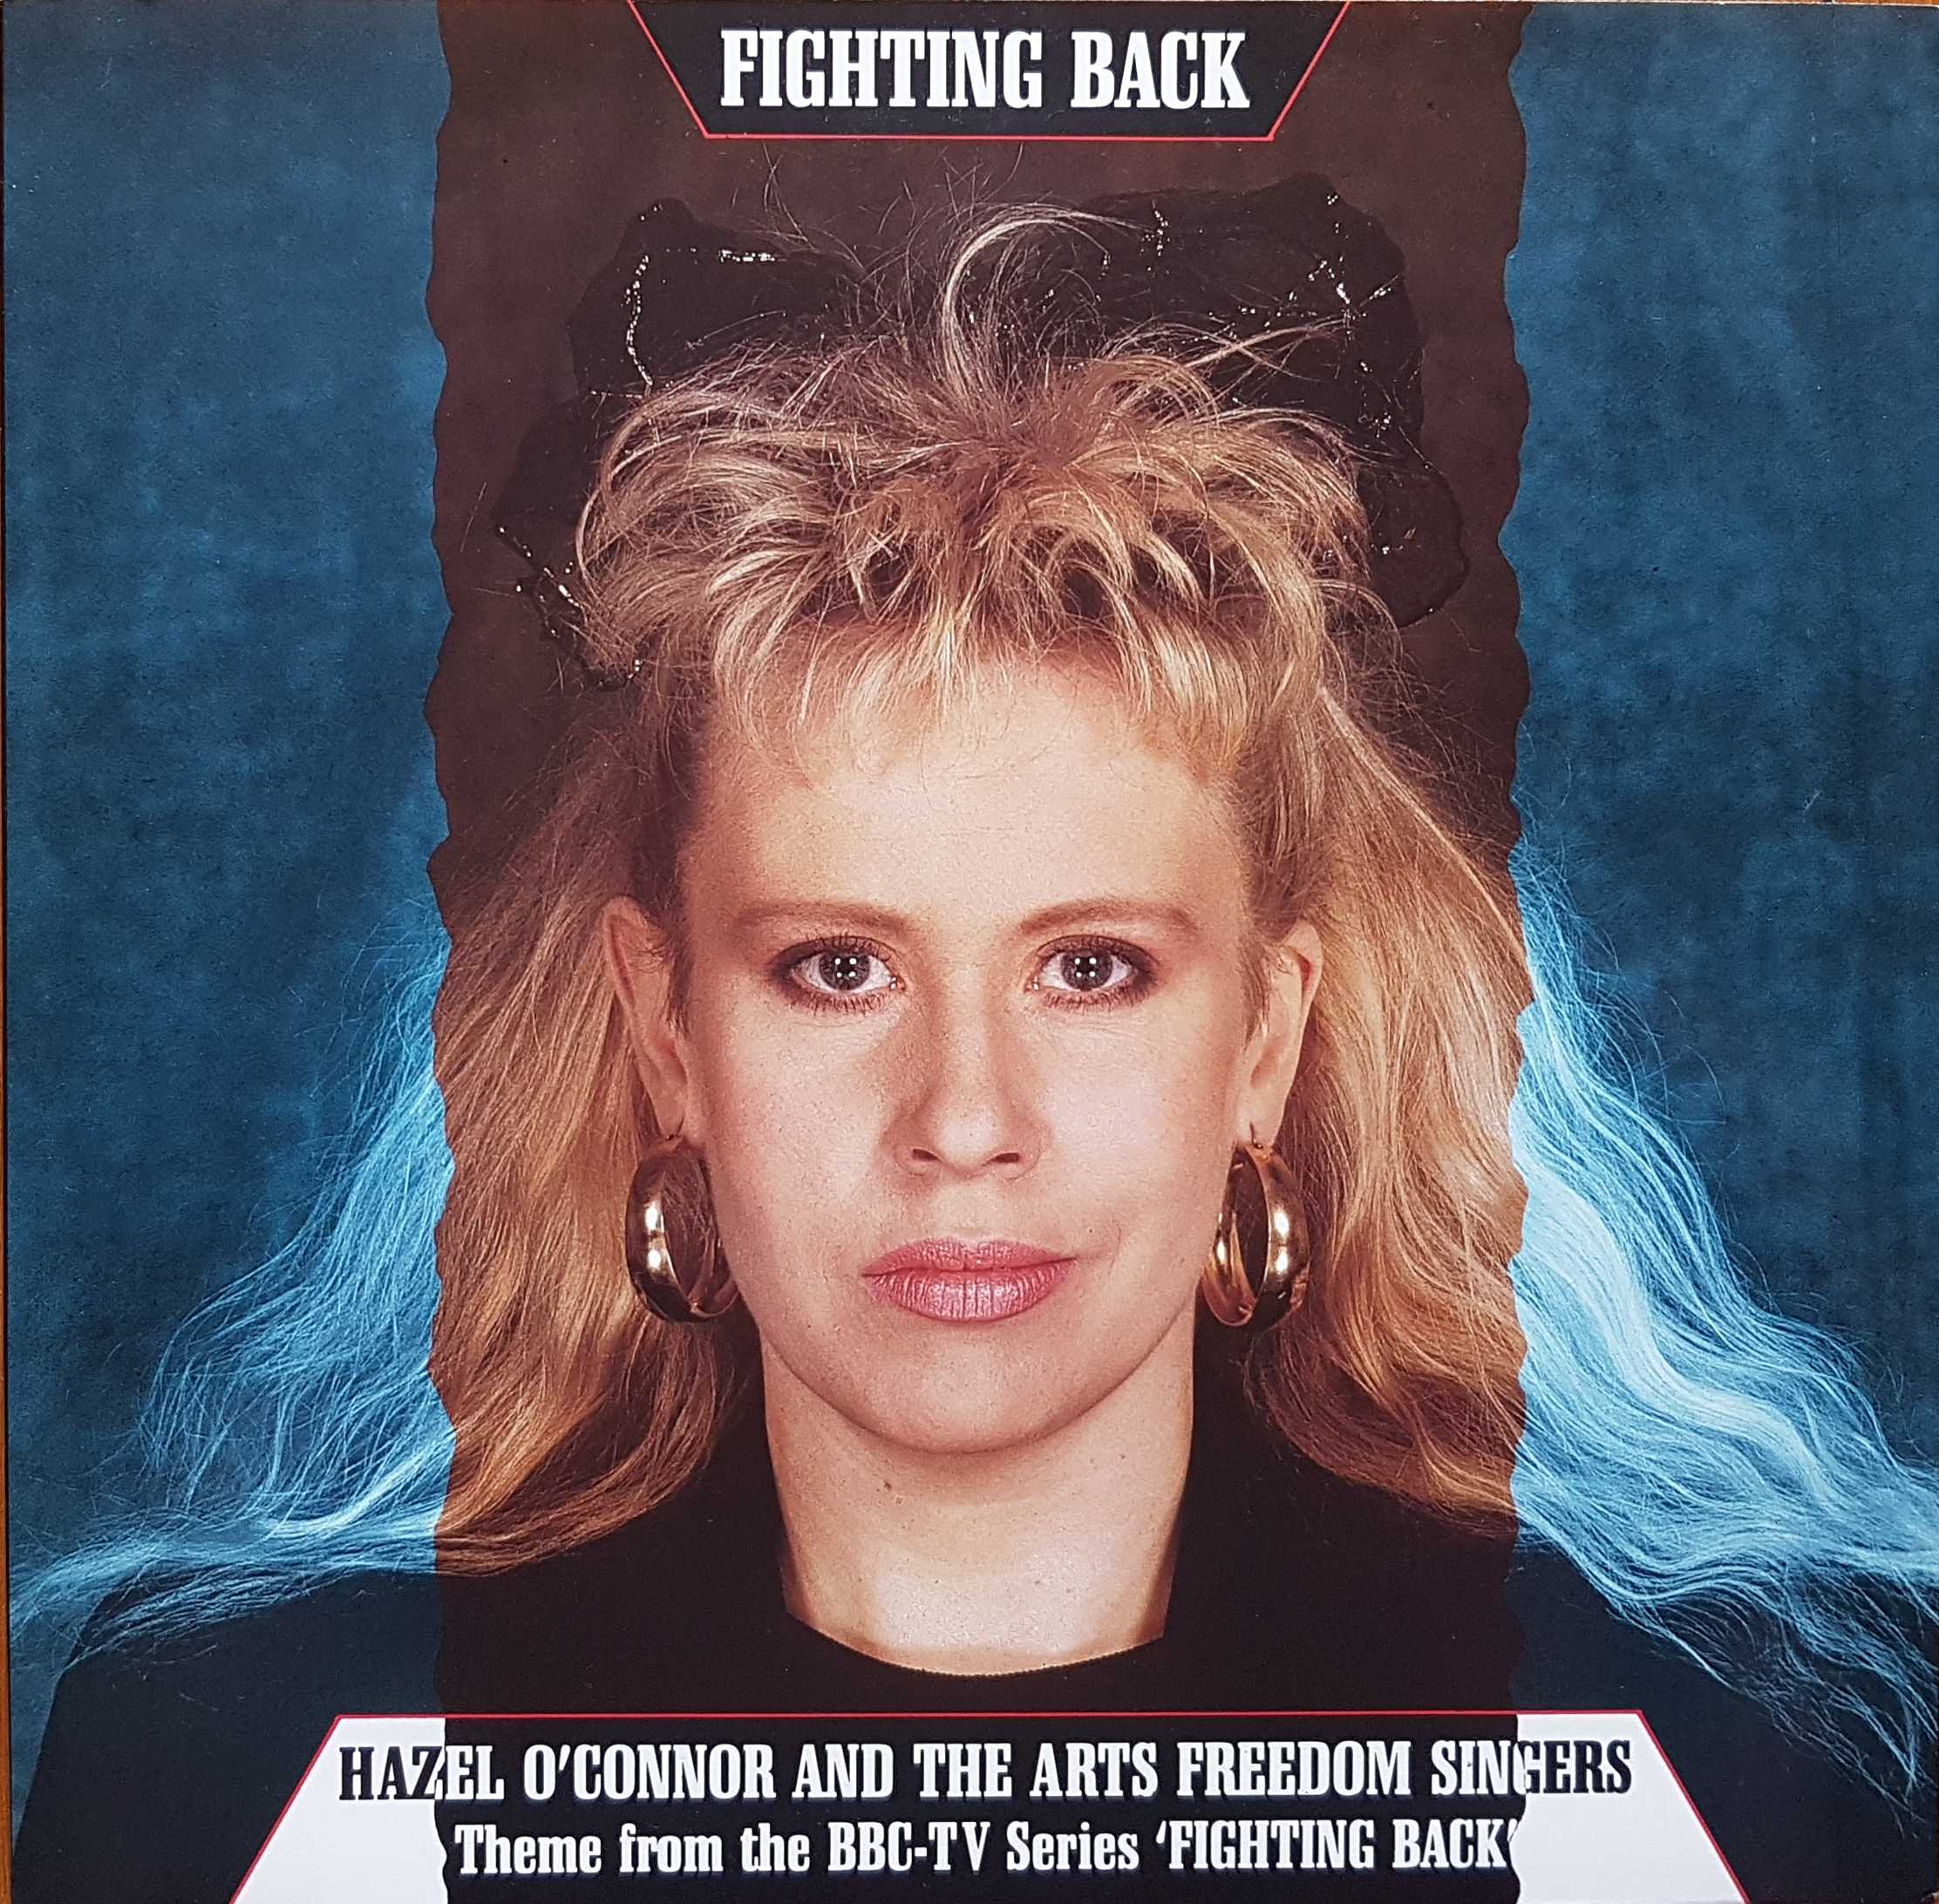 Picture of Fighting back by artist Hazle O'Connor from the BBC 12inches - Records and Tapes library